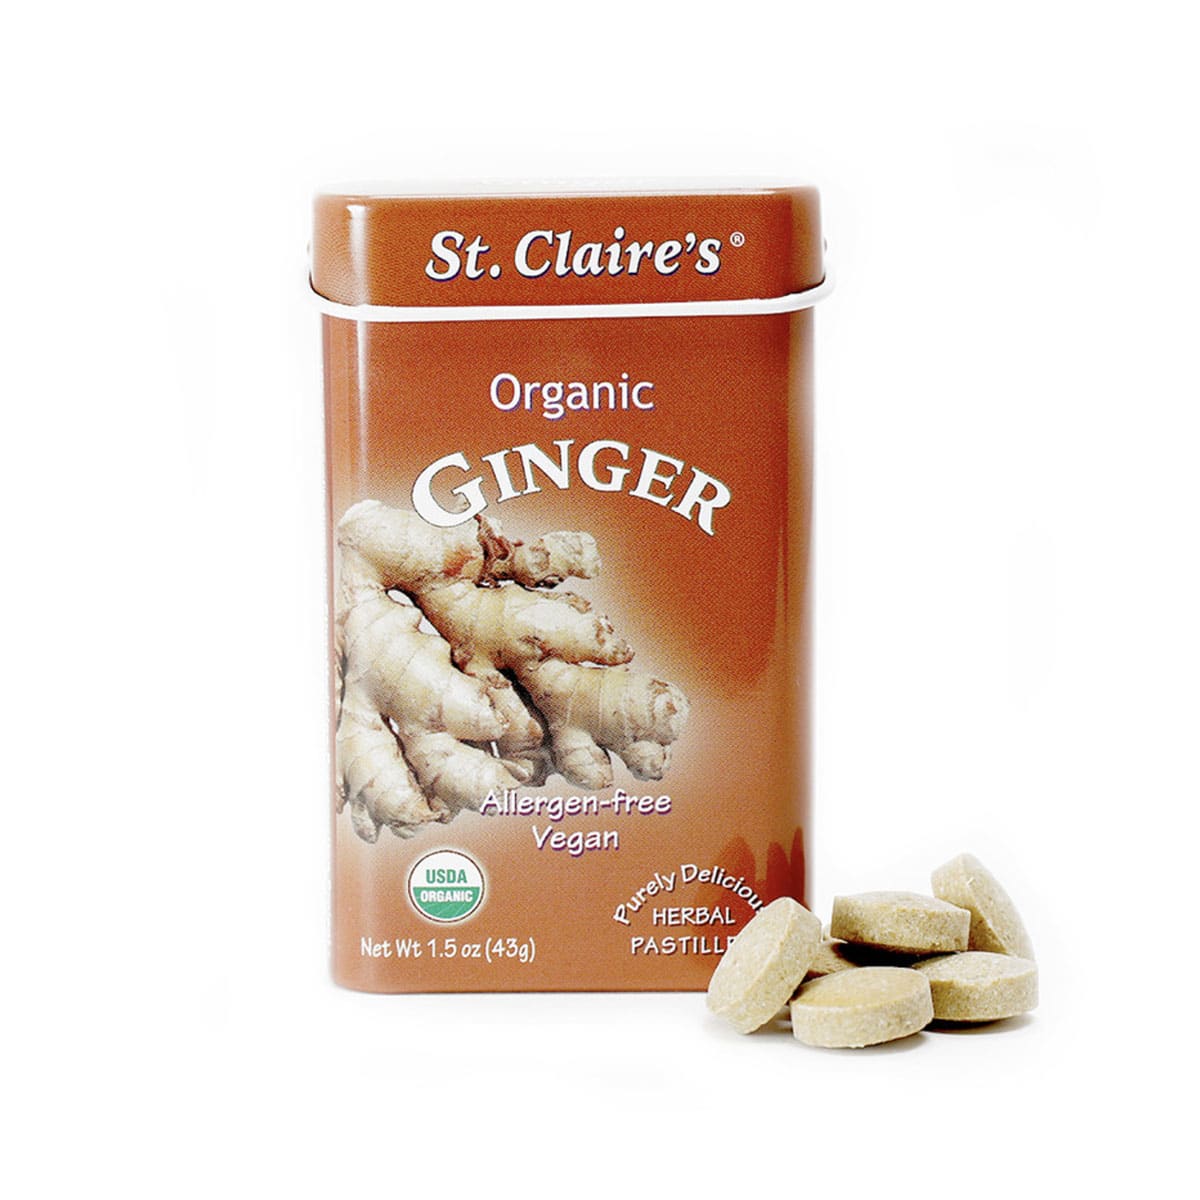 Ginger Pastilles (or any convenient form of ginger) can be a lifesaver for an upset tummy